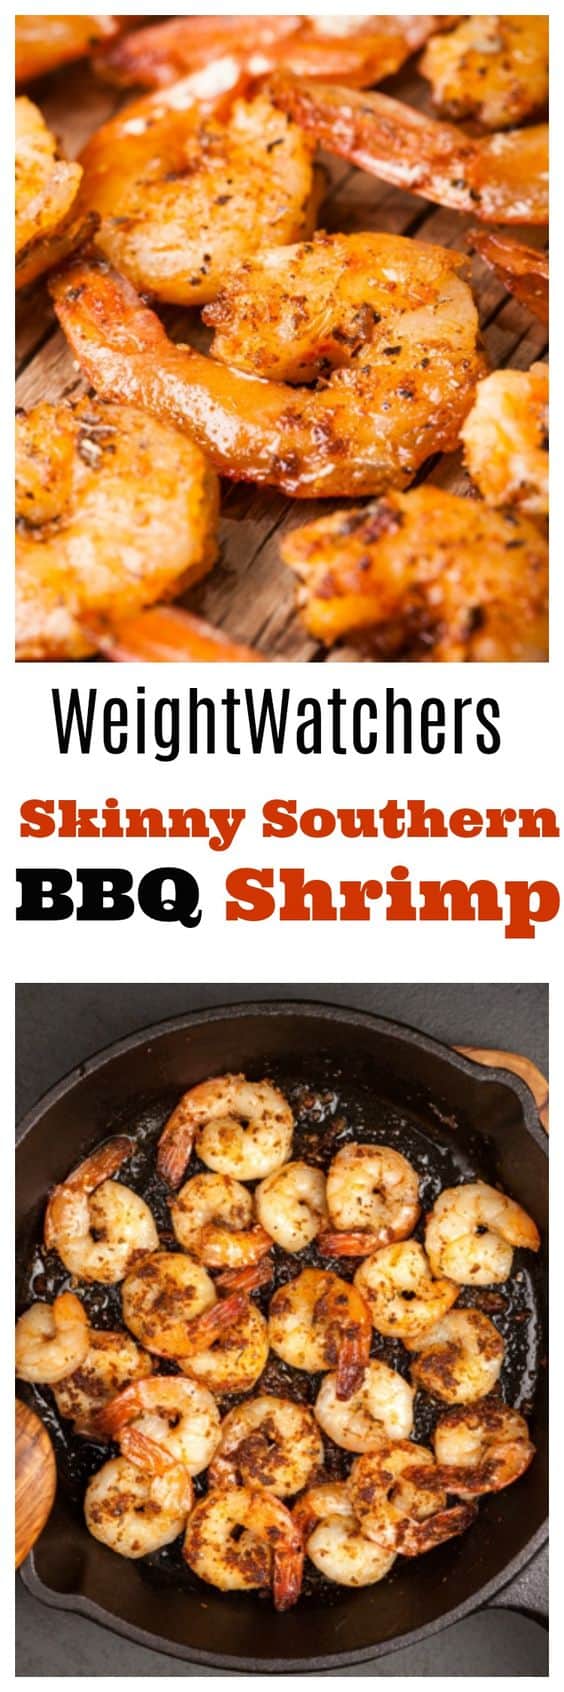 Skinny Southern Barbecued Shrimp Recipe 3 WW Freestyle